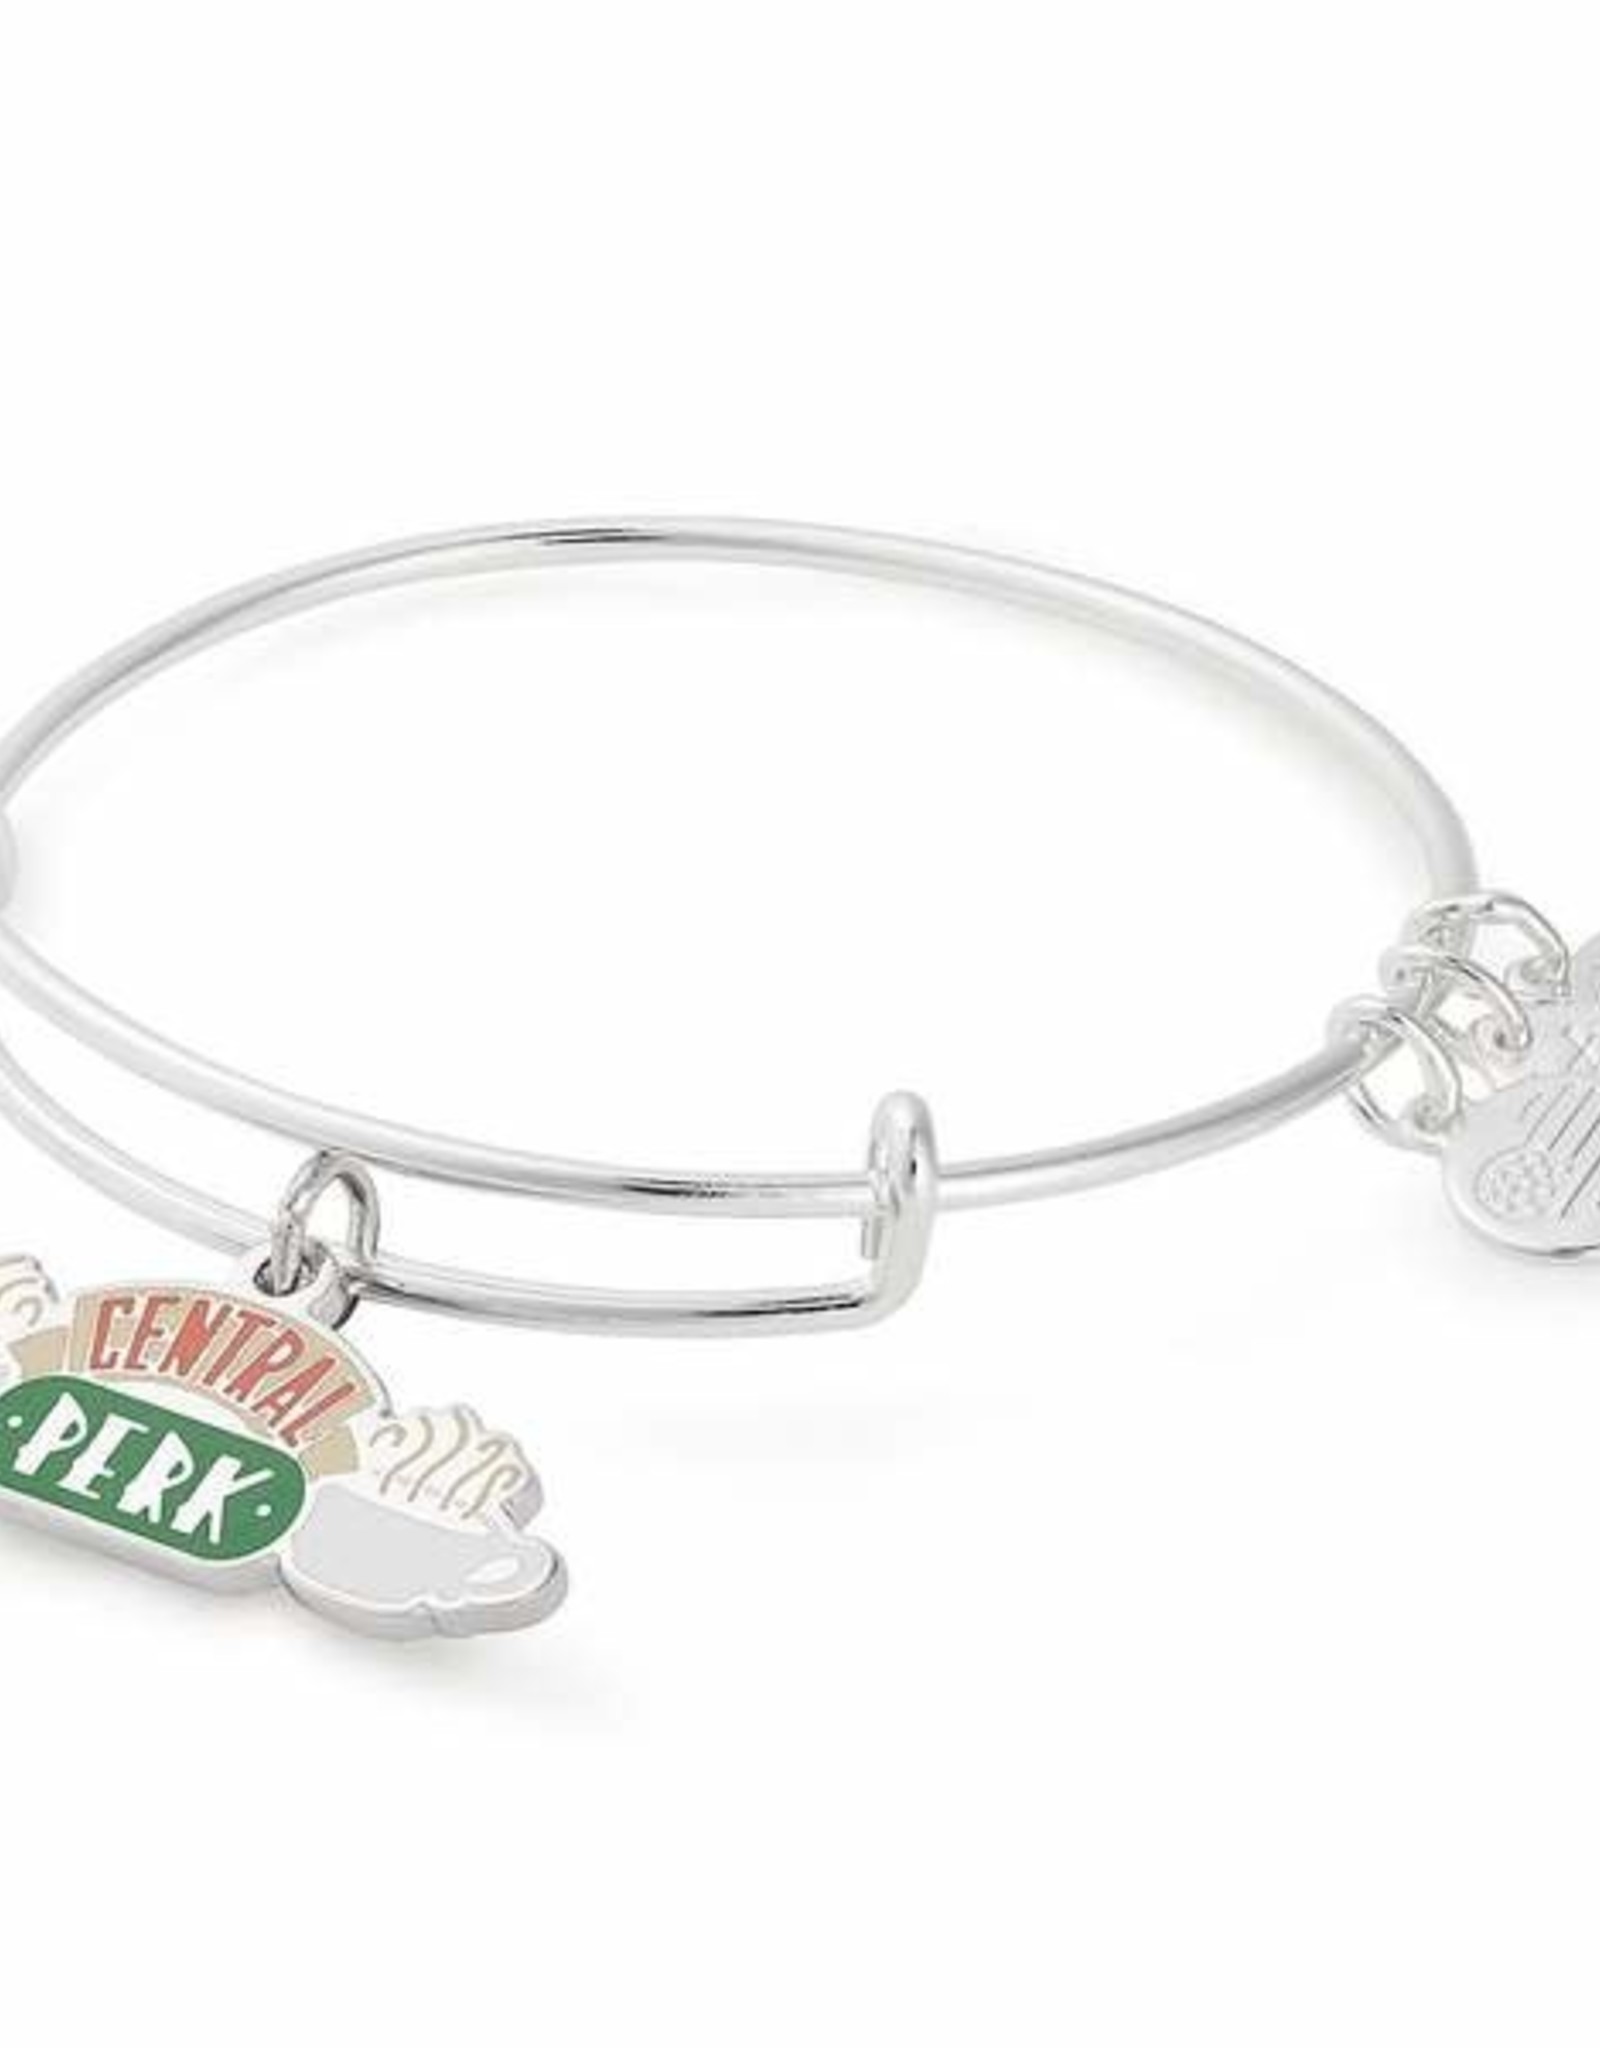 Alex and Ani FRIENDS, Central Perk, Shiny Silver